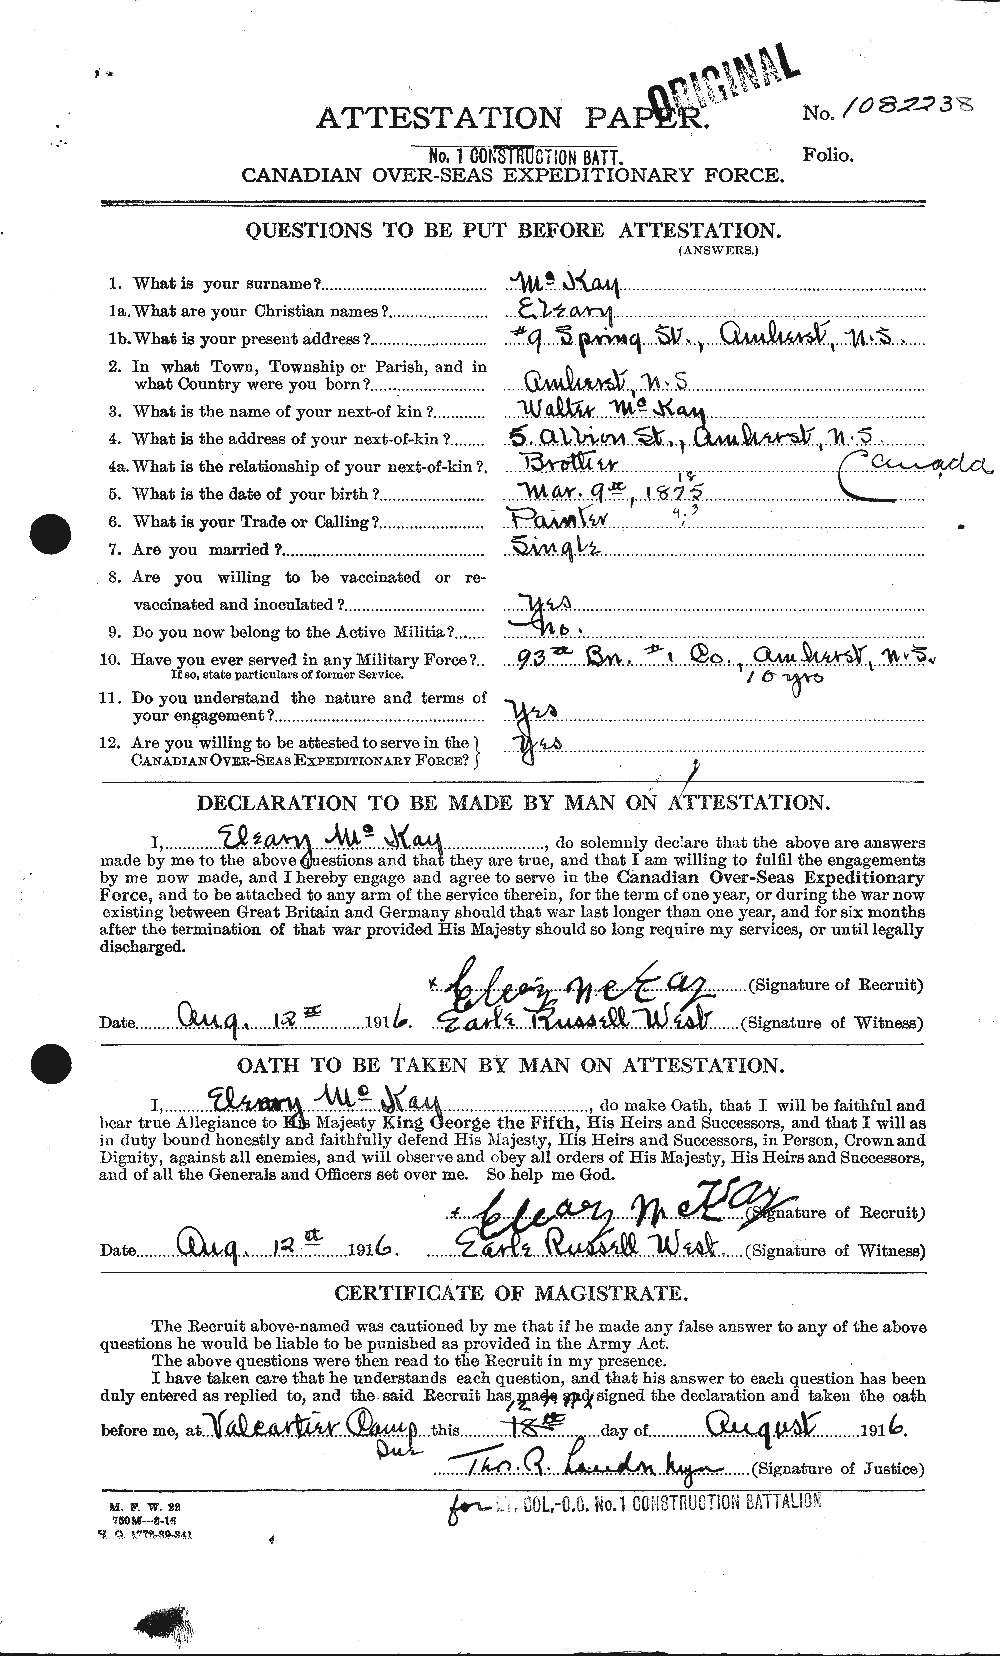 Personnel Records of the First World War - CEF 534578a